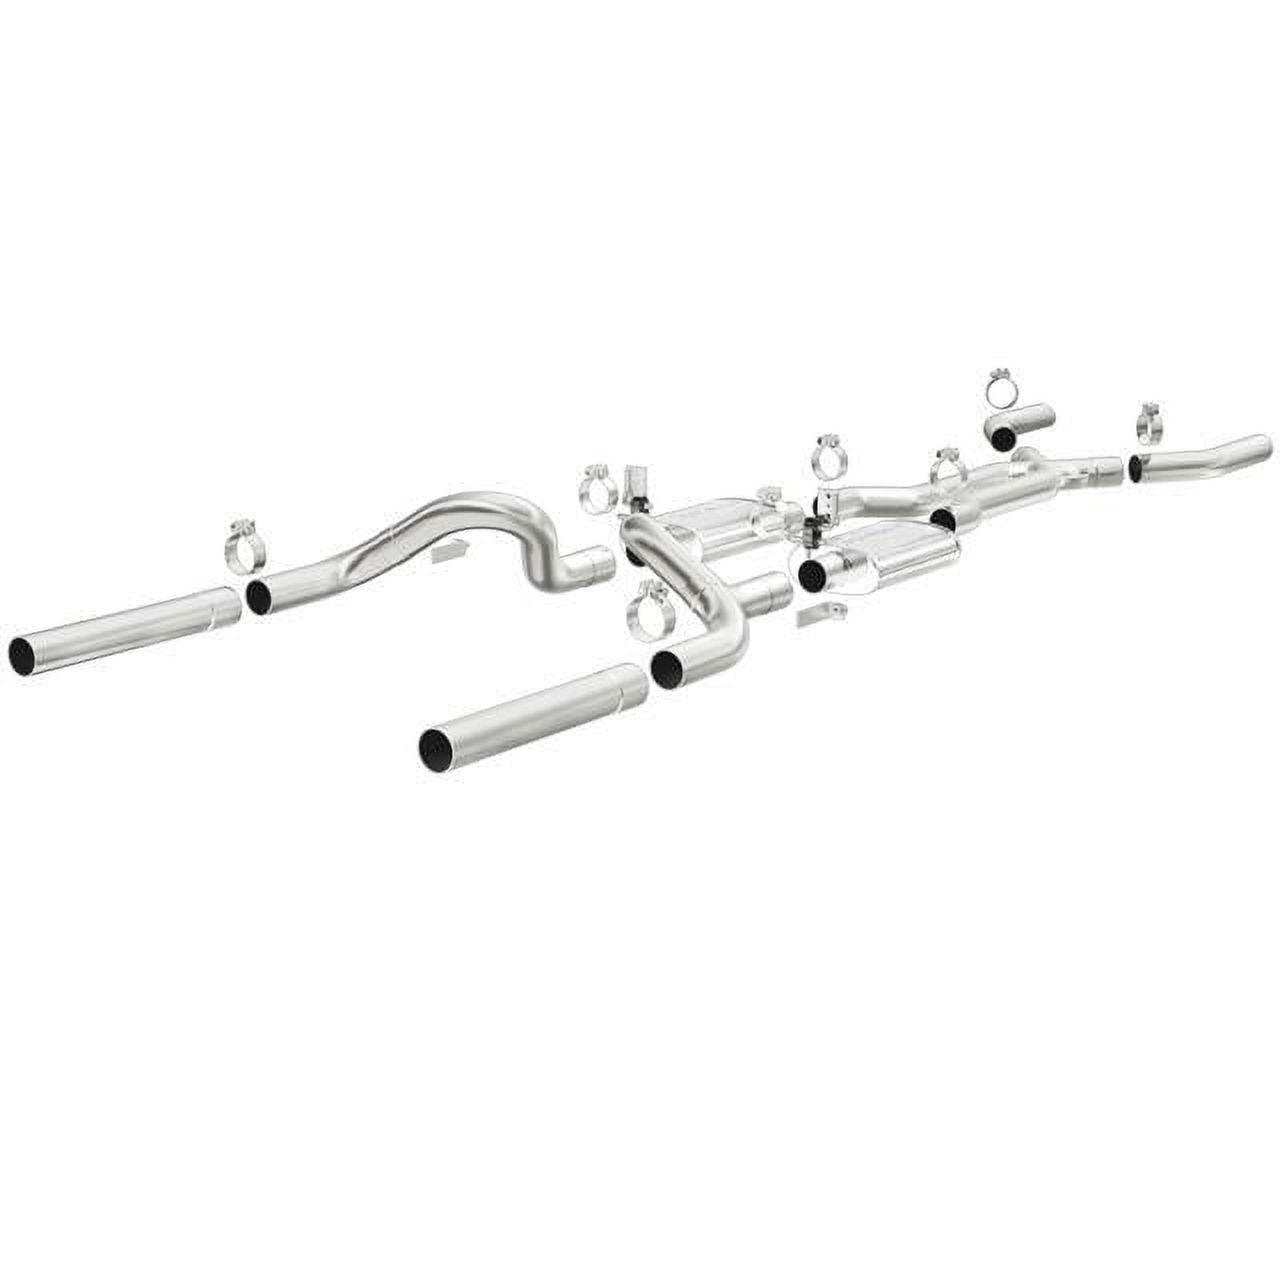 Magnaflow Performance Exhaust 15817 Exhaust System Kit Fits select: 1966 FORD MUSTANG - image 1 of 2